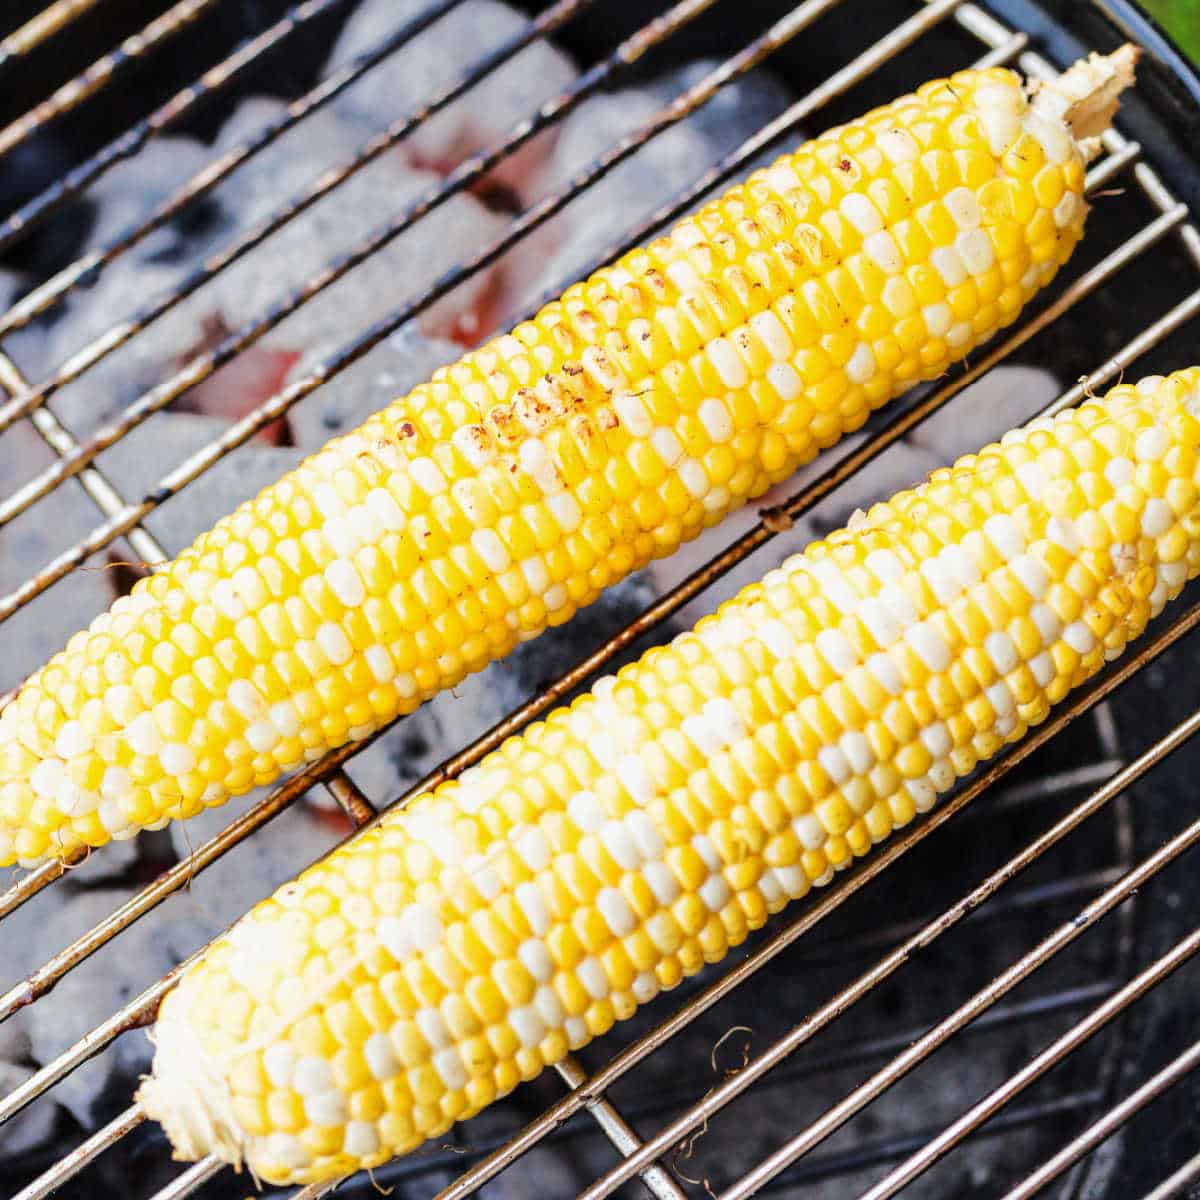 2 ears of husked sweet corn on a charcoal grill